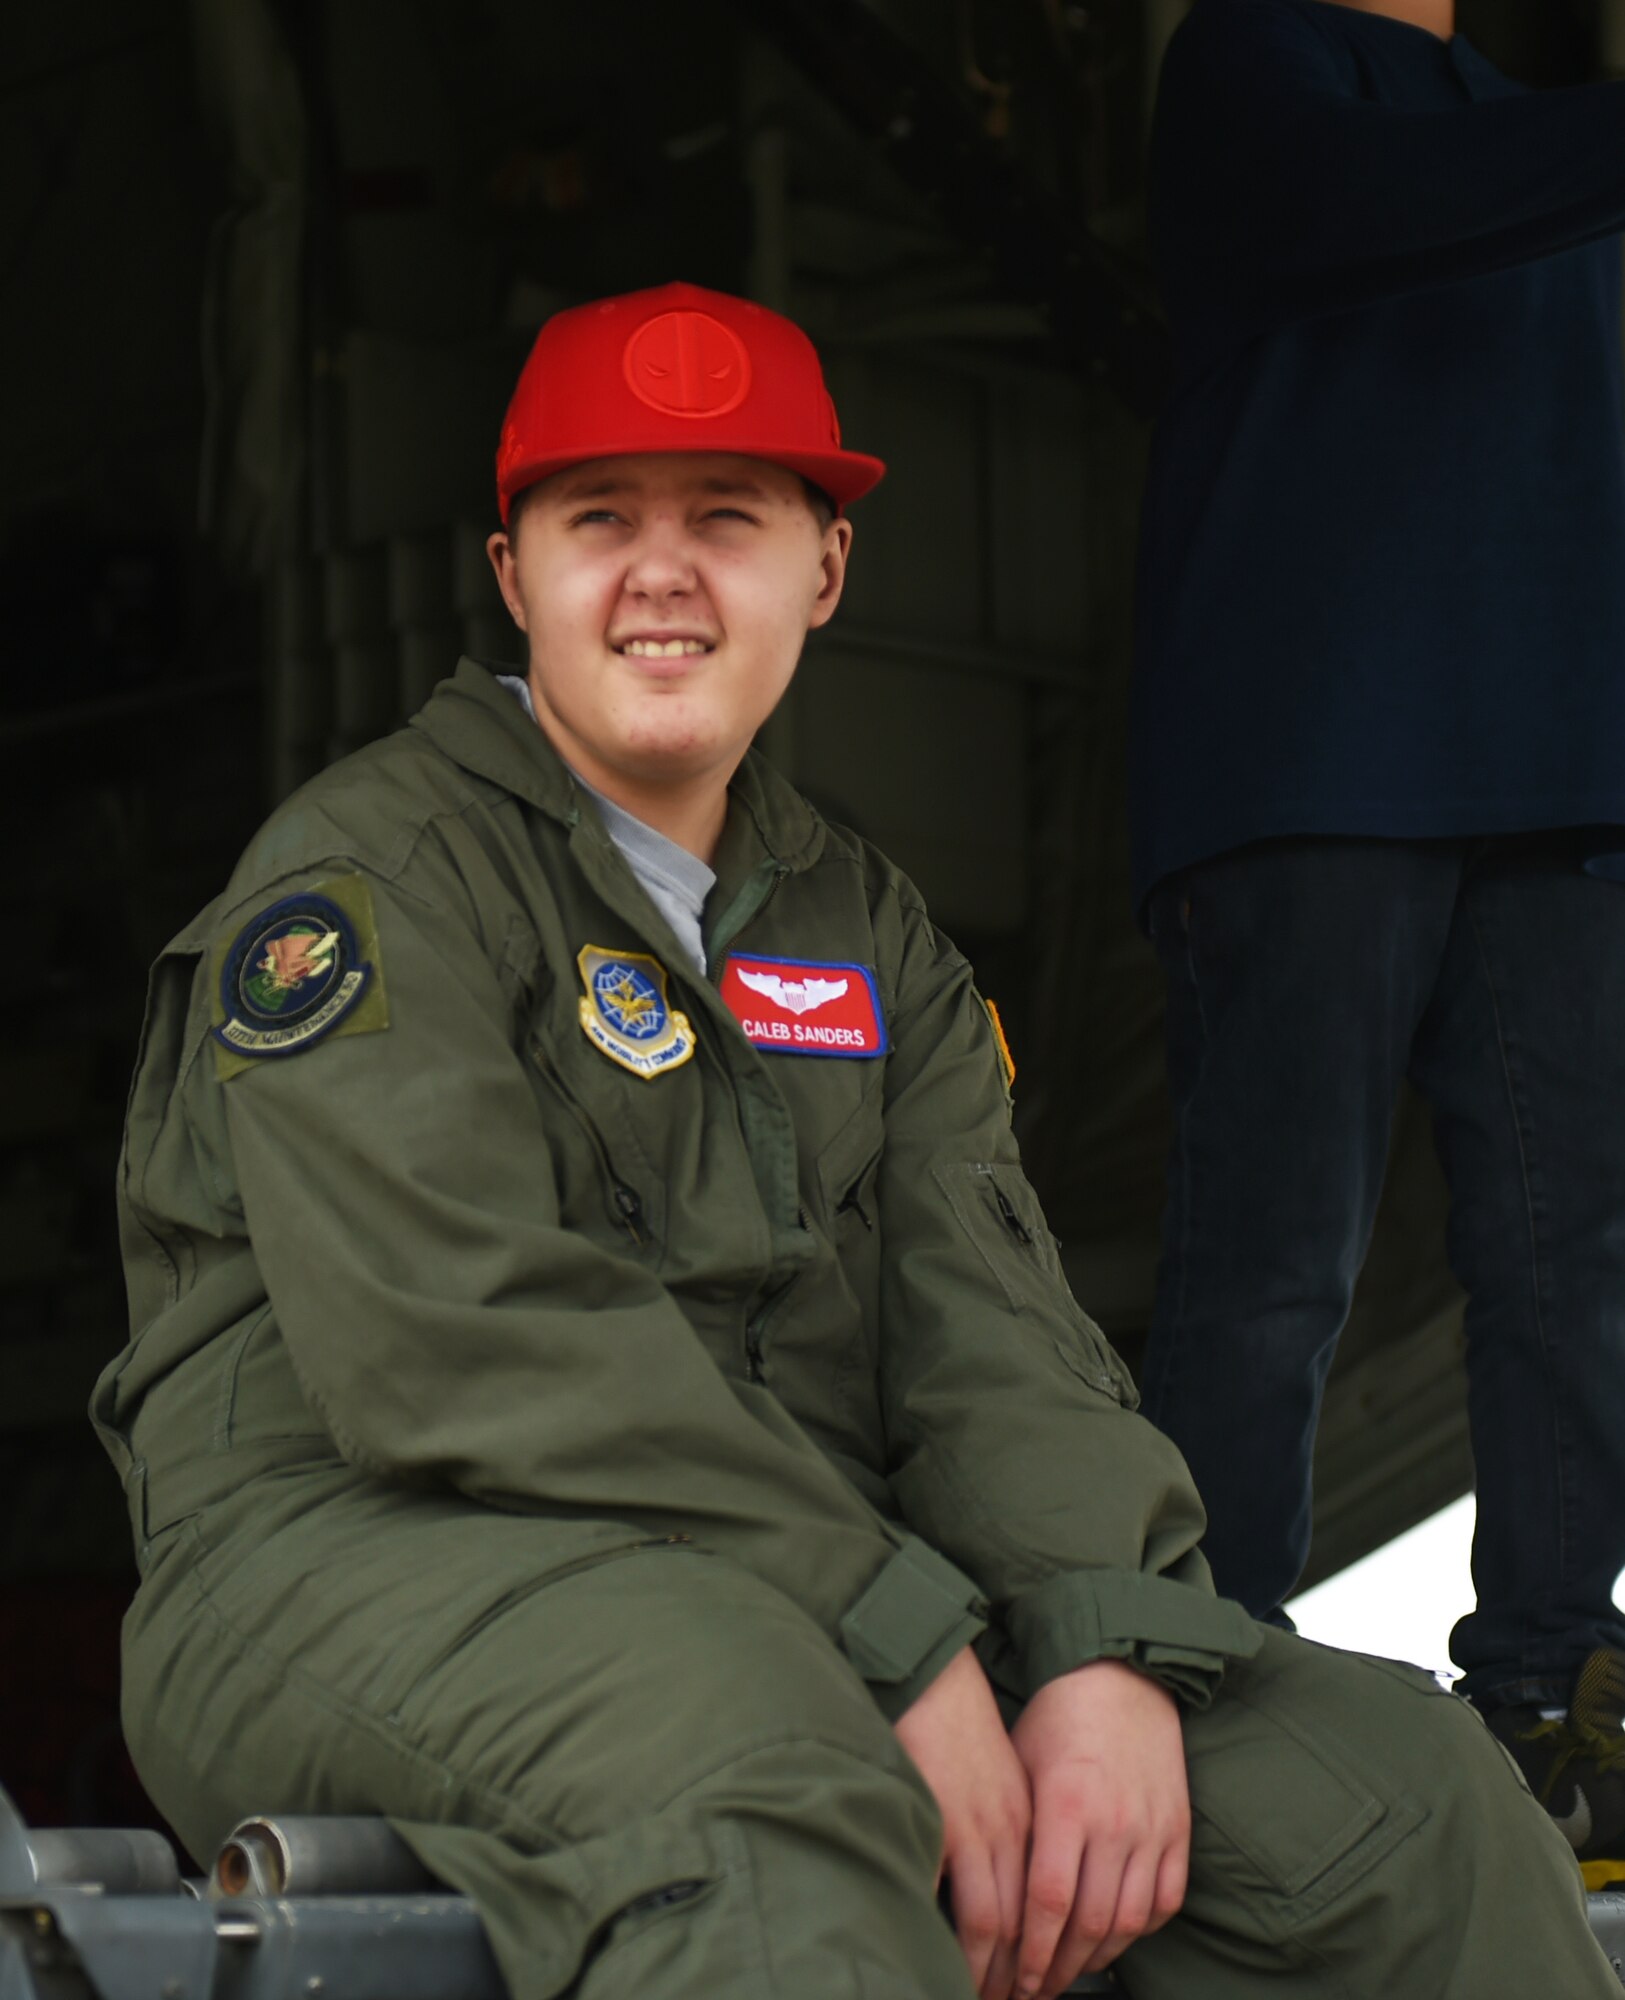 Abilene boy becomes Airman for a day